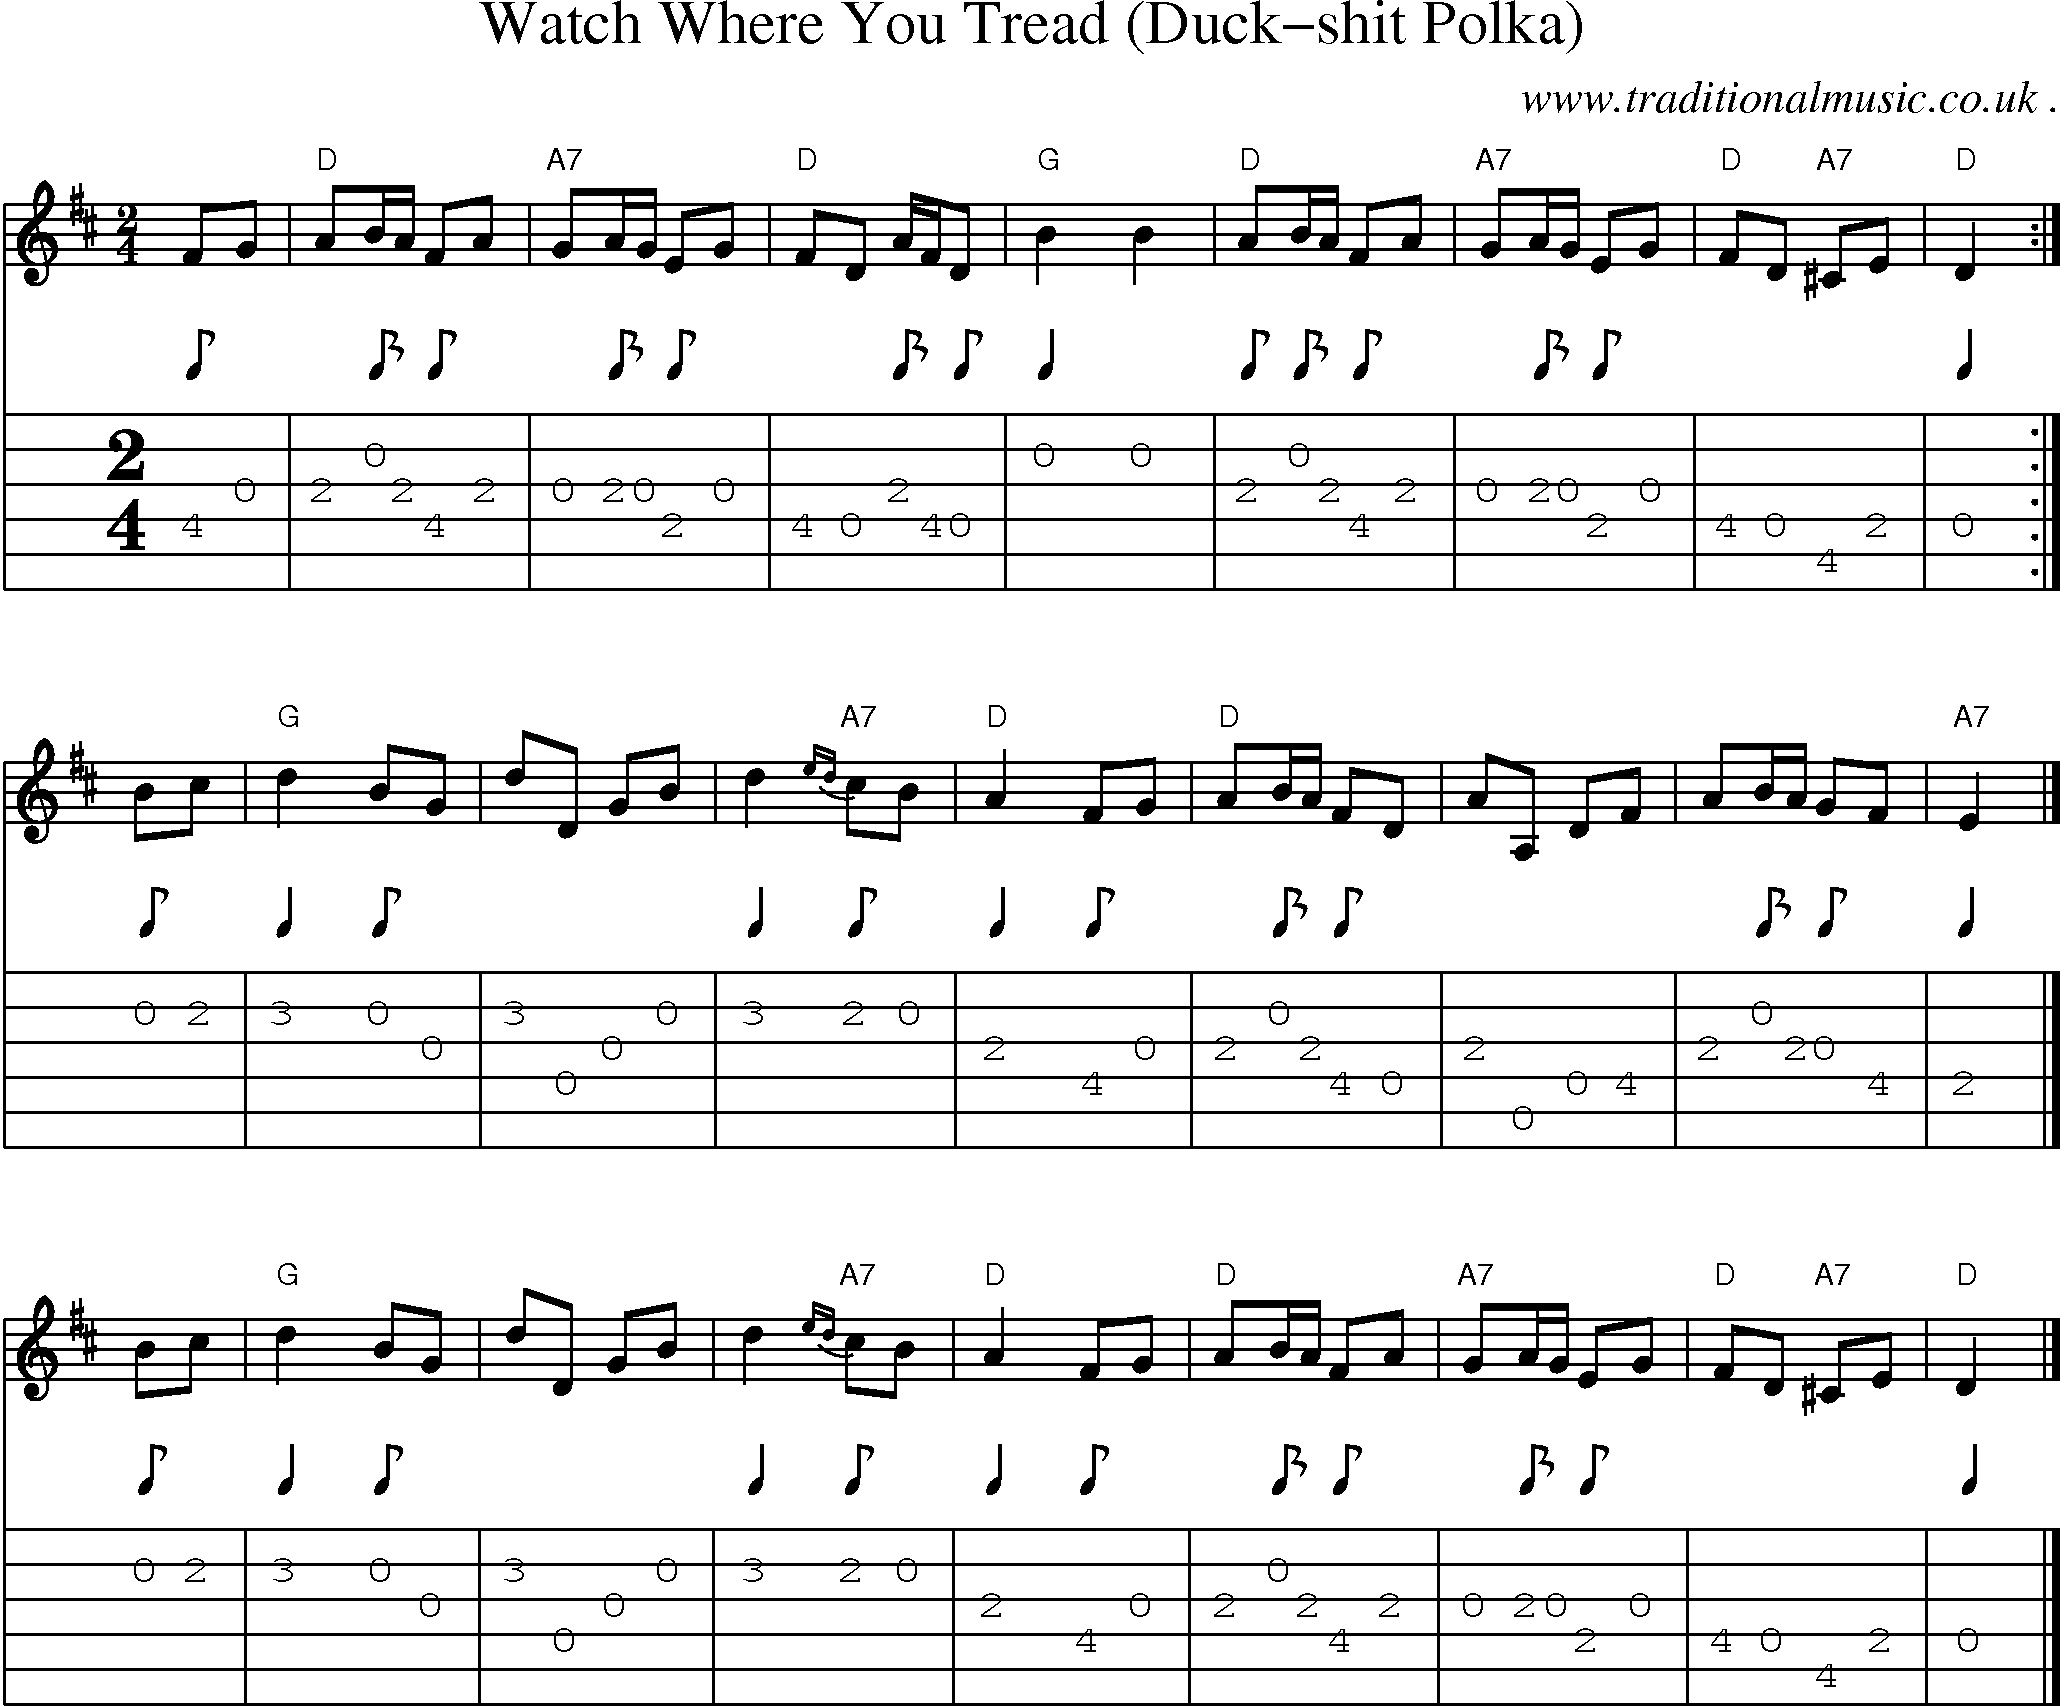 Sheet-music  score, Chords and Guitar Tabs for Watch Where You Tread Duck-shit Polka